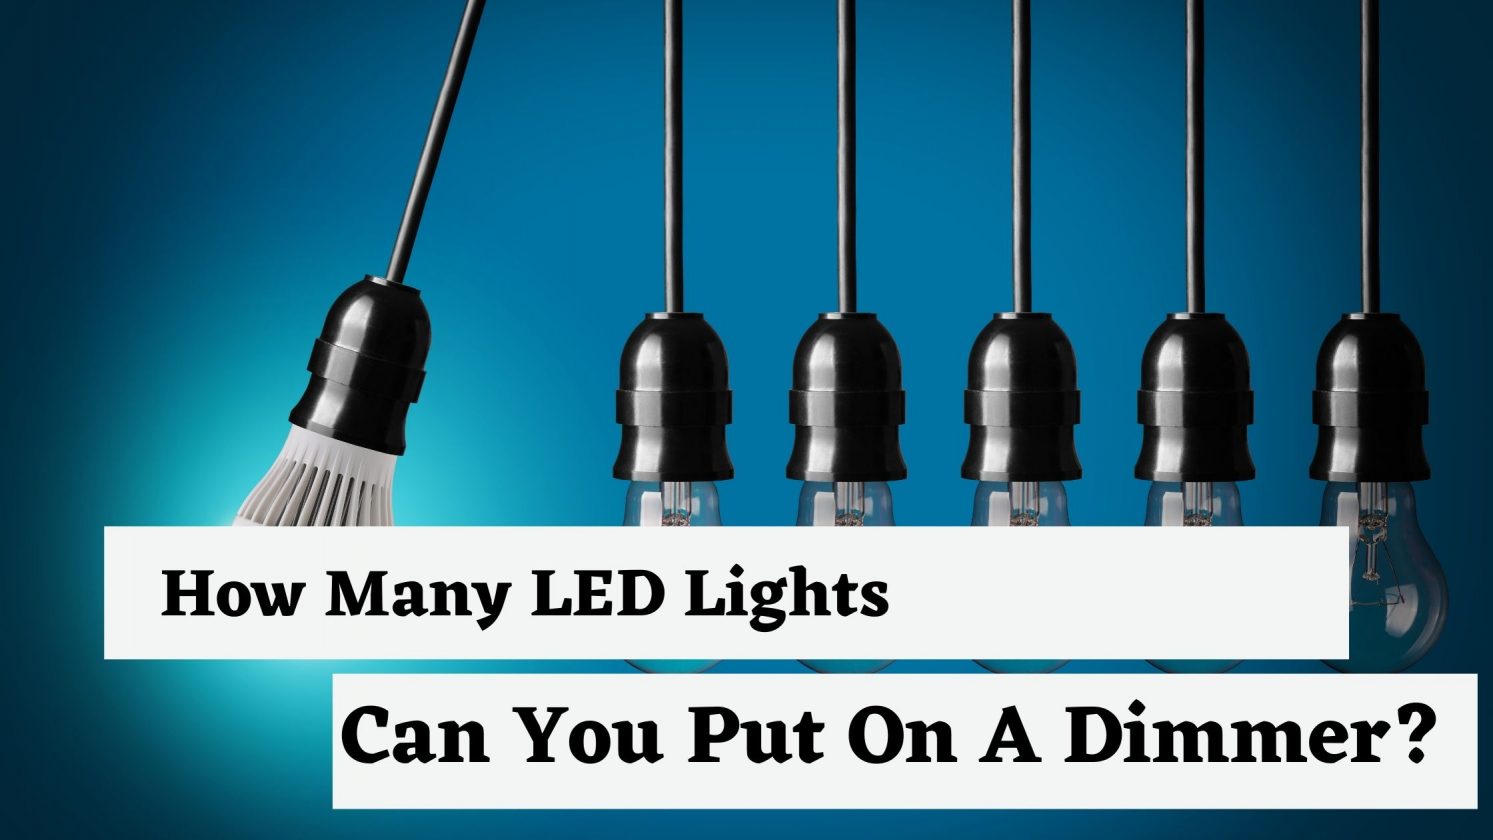 How Many LED Lights Can You Put On A Dimmer?